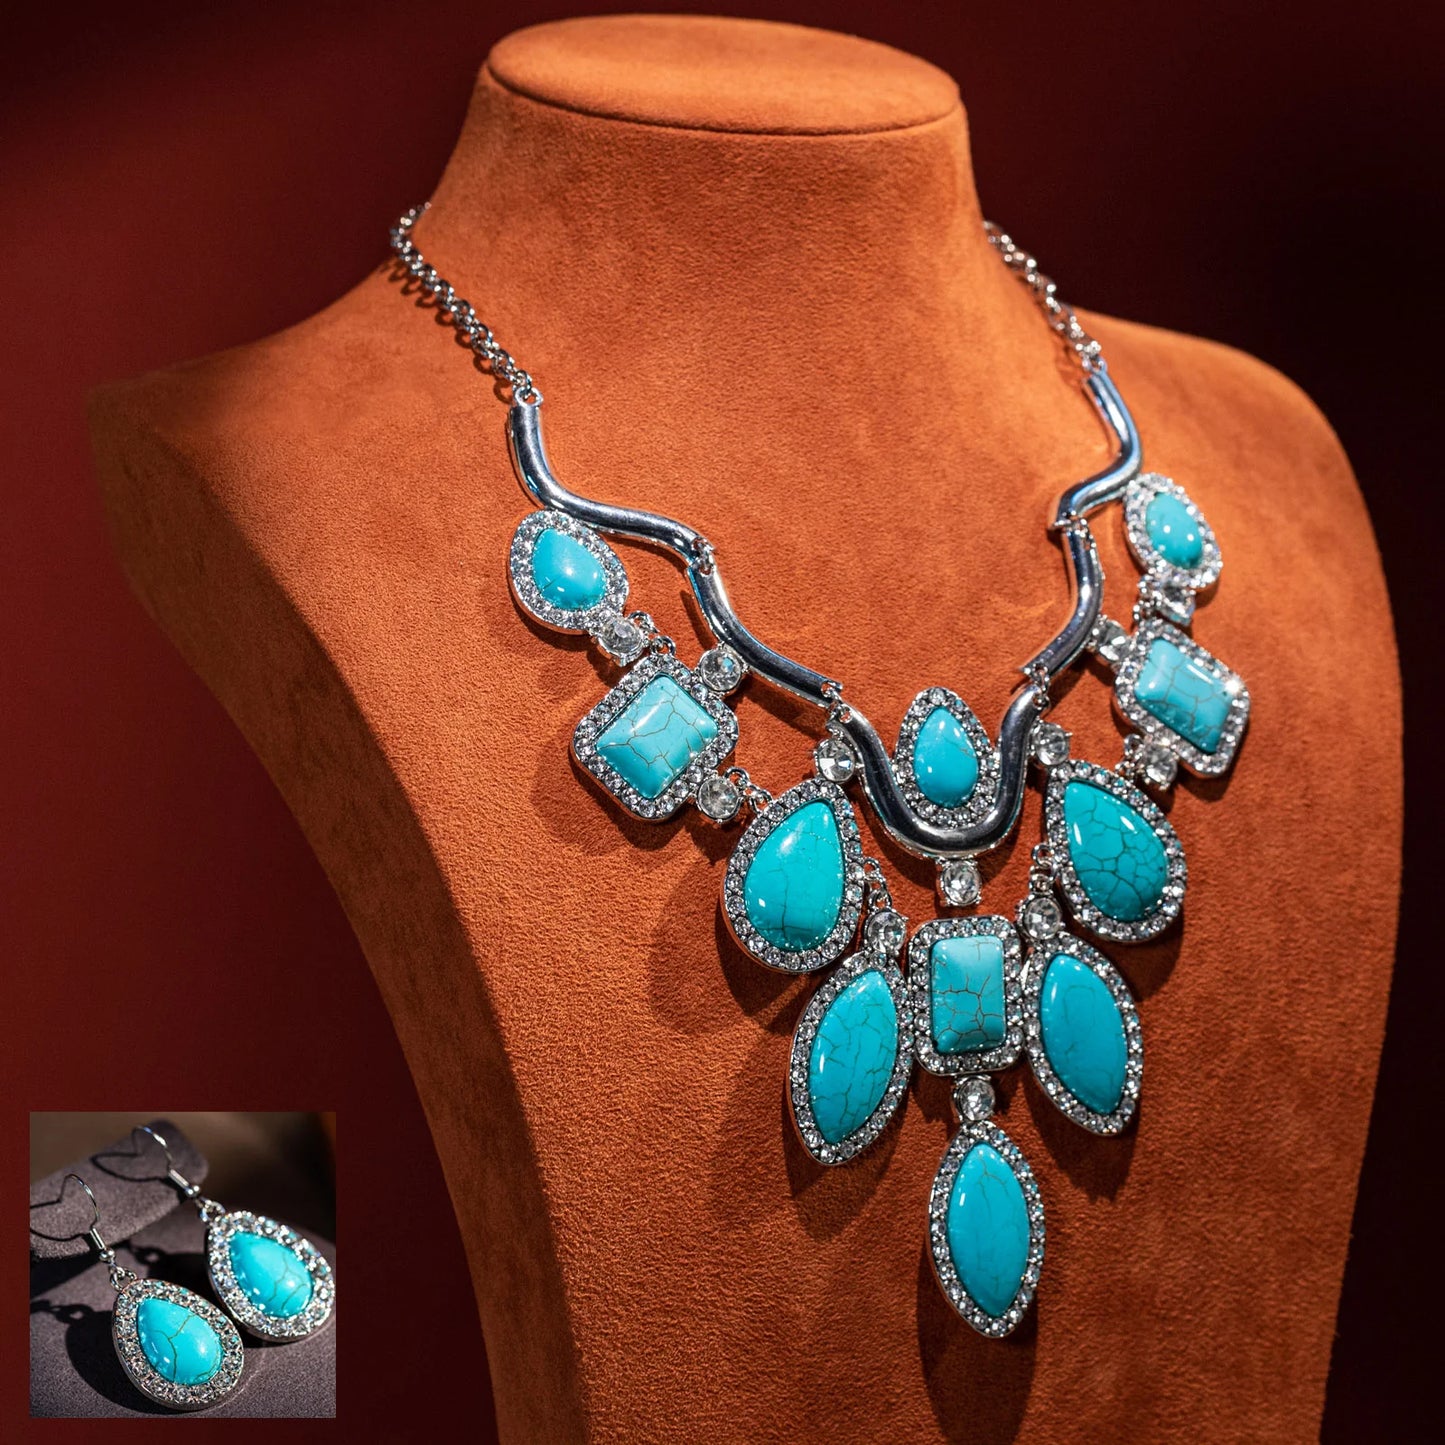 Rustic Couture Jewelry Sets Bohemian Pendant Necklace Earrings